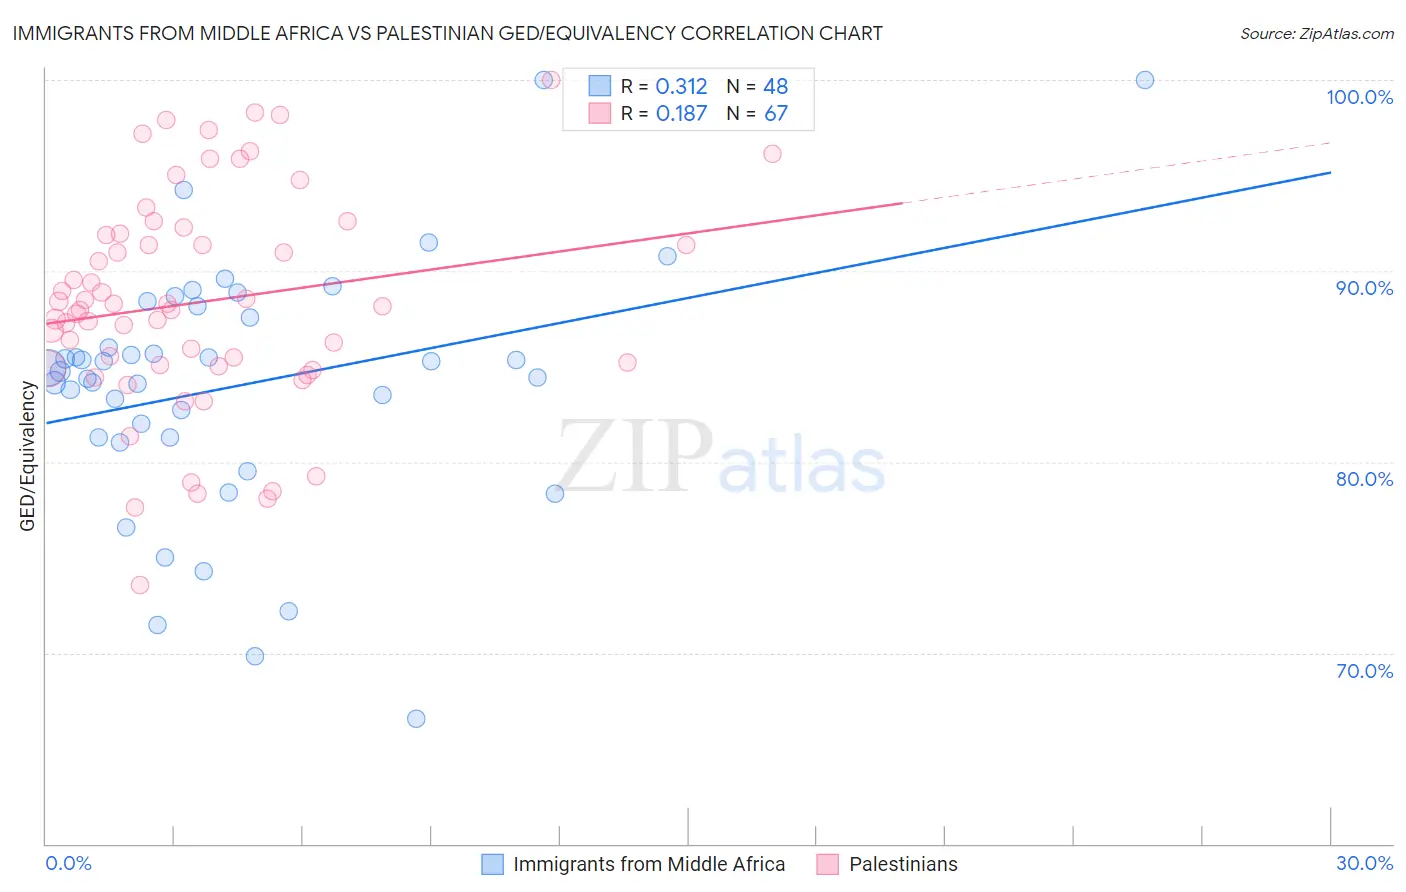 Immigrants from Middle Africa vs Palestinian GED/Equivalency